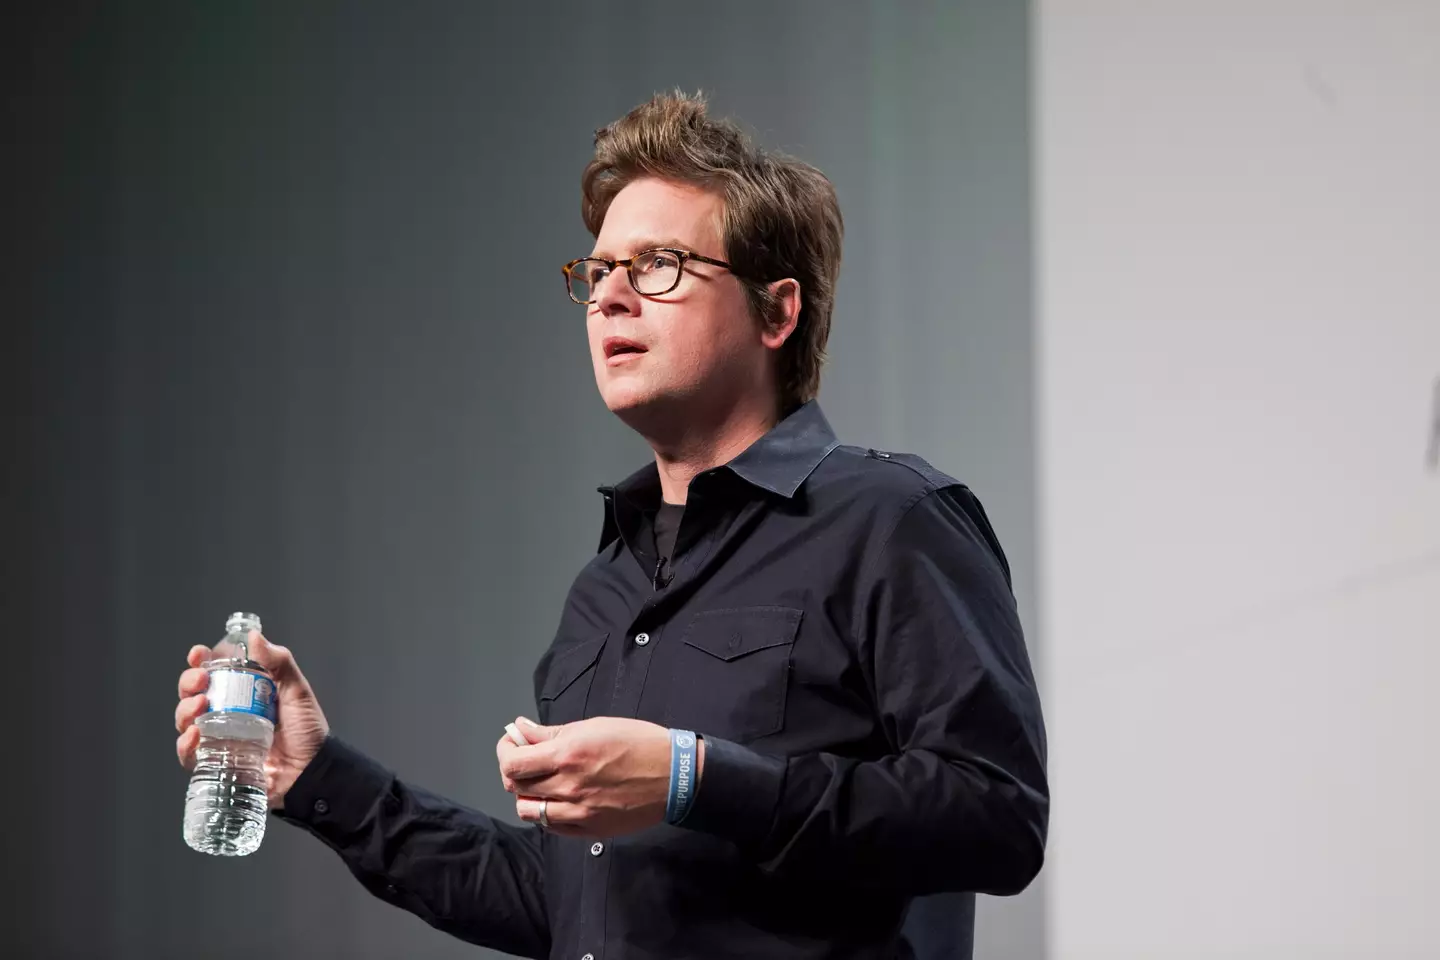 Biz Stone co-founded Twitter in 2006.